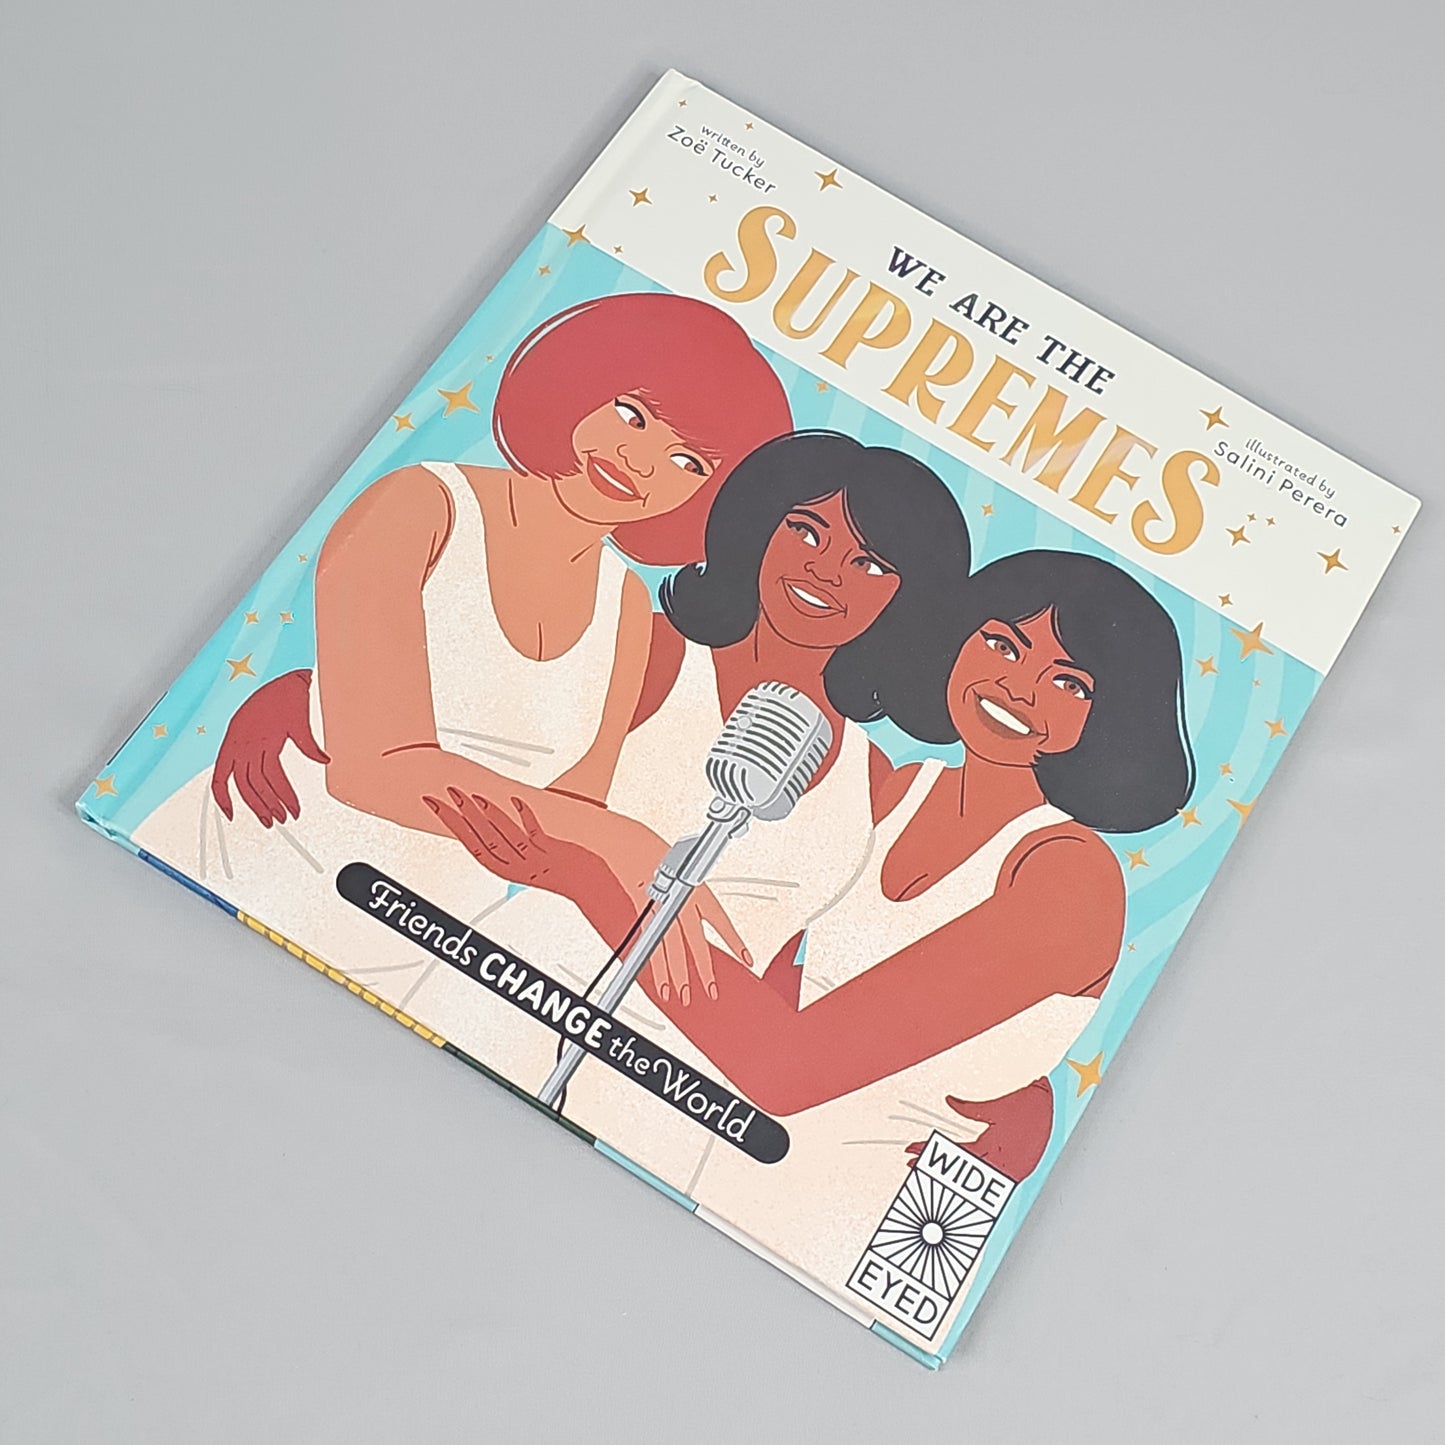 WE ARE THE SUPREMES by Zoe Tucker Book Hardback (New)